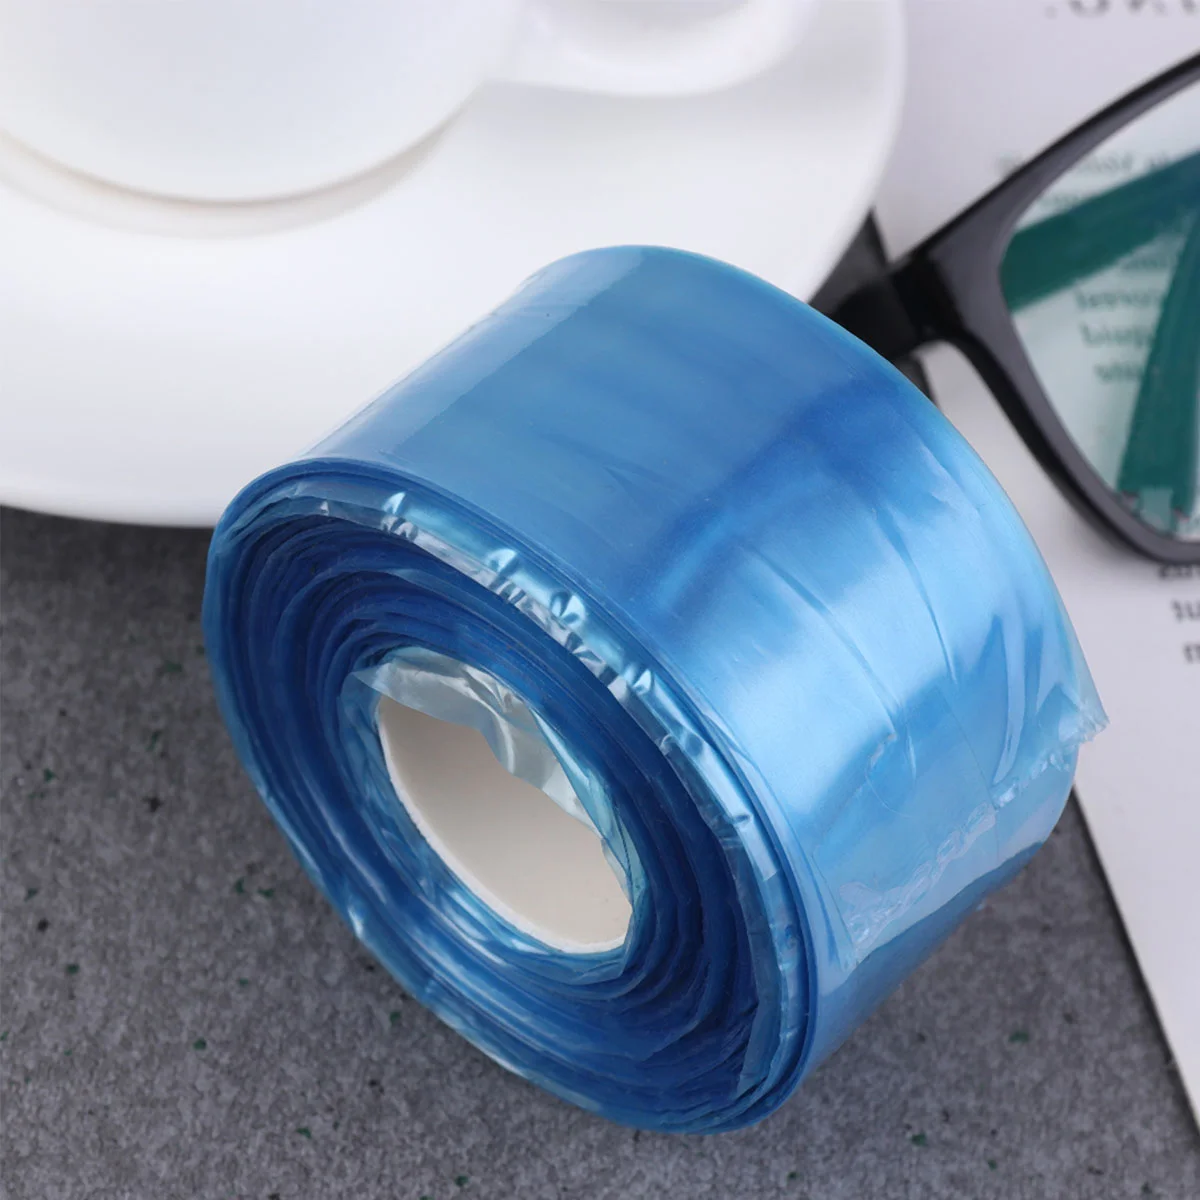 

200Pcs Disposable Glass Legs Cover Hair Dyeing Spectacles Protector Glasses Legs Slender Bag Blue